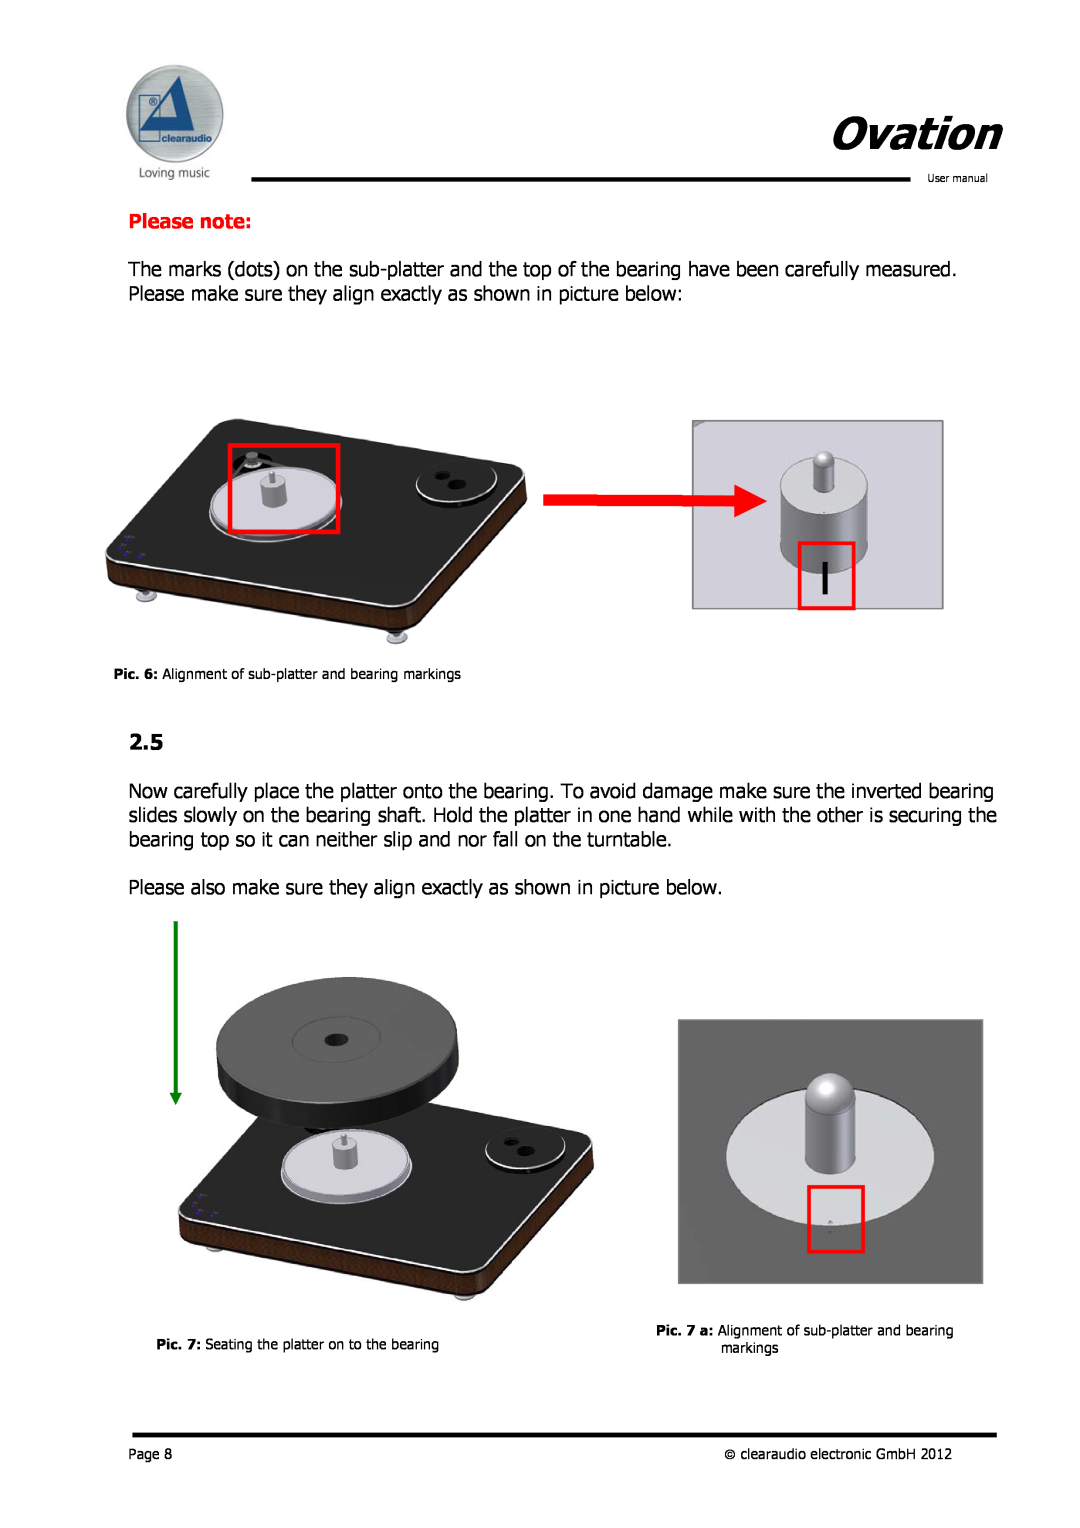 Clearaudio Version-1.4_12_03_08_E Please note, Ovation, Pic. 7 Seating the platter on to the bearing, markings, Page 